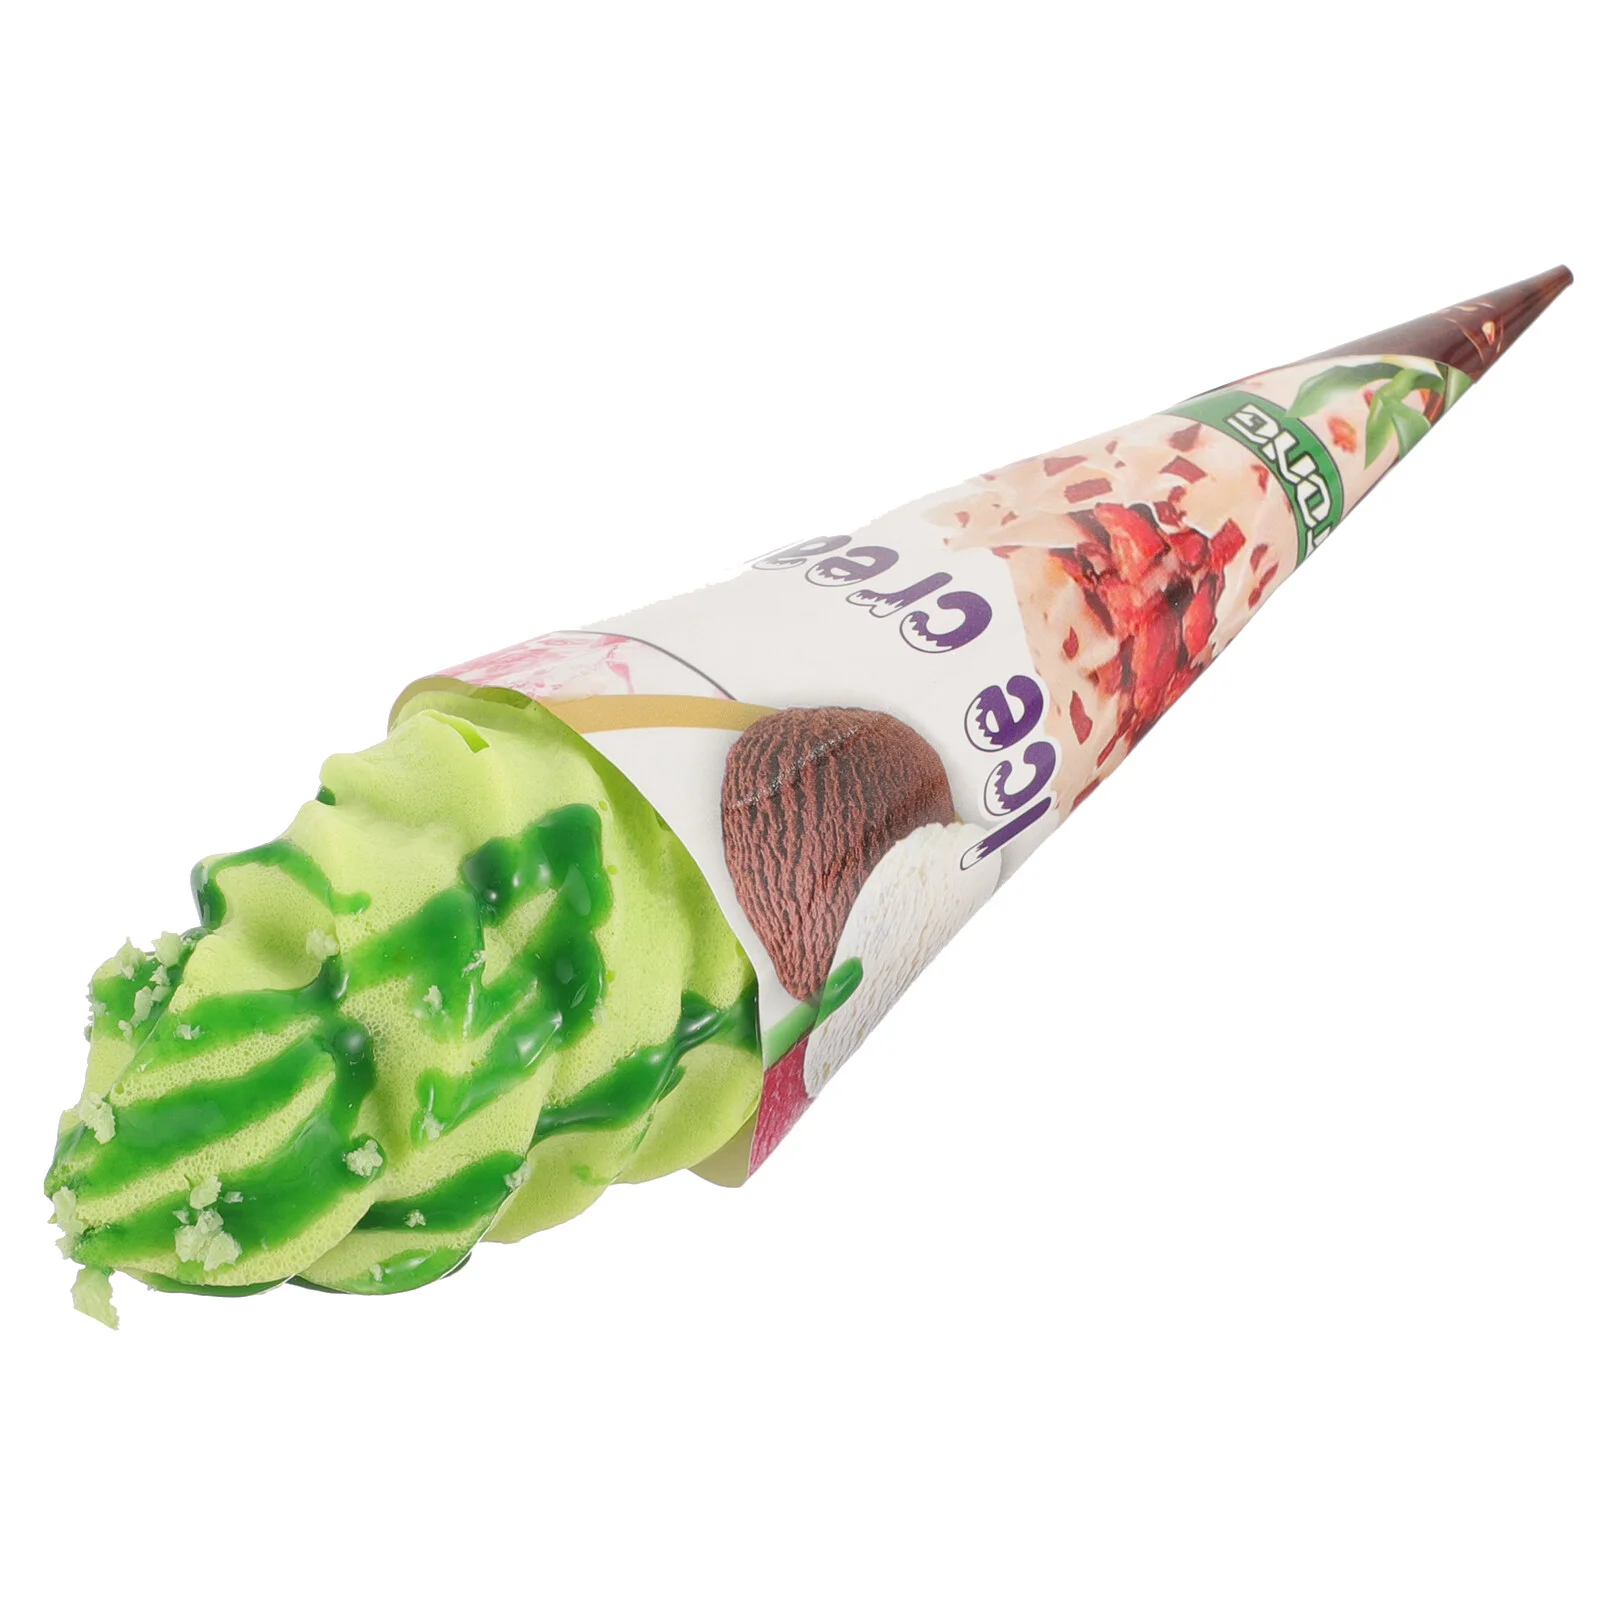 

Ice Cream Model Fake Cone Toy For Kids Kids Pretend Play Toy Toys Adornments Dessert Decorate